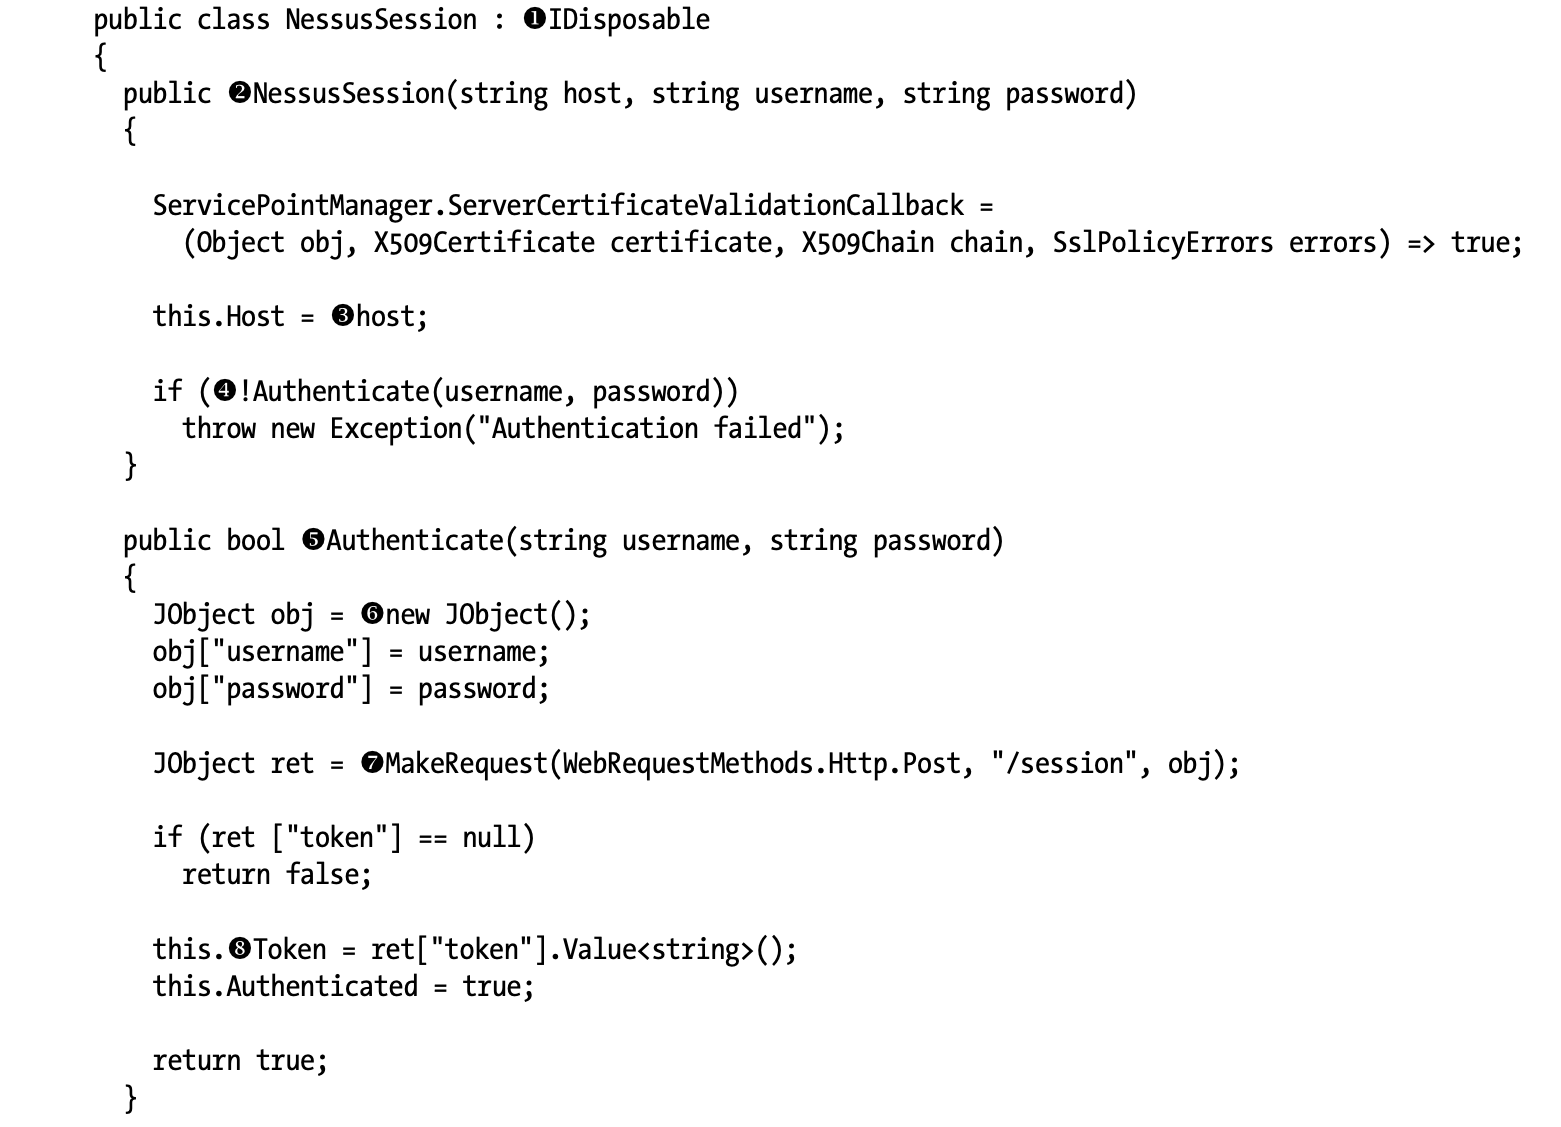 The beginning of the NessusSession class showing the constructor and Authenticate() method
